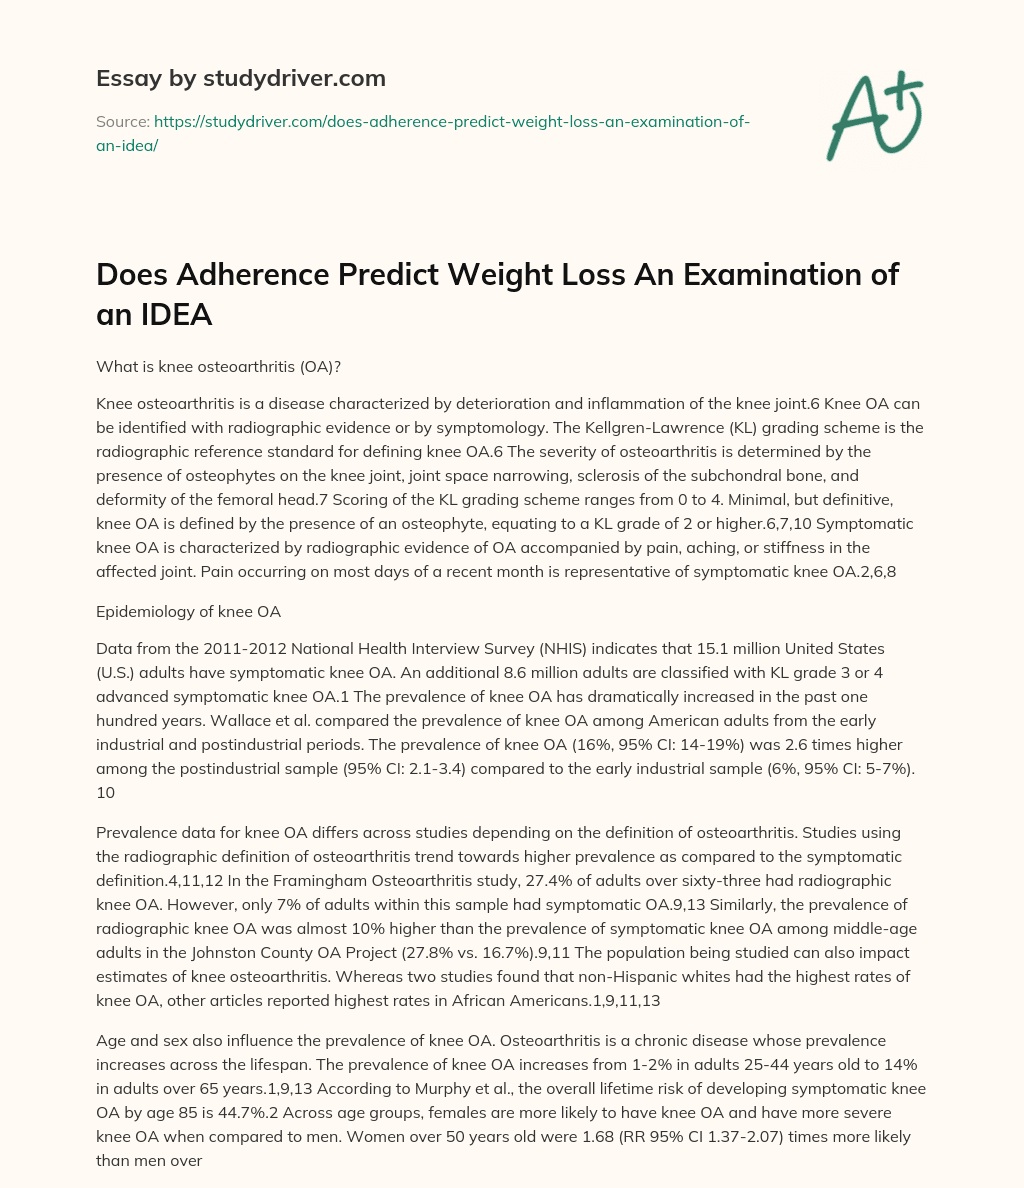 Does Adherence Predict Weight Loss an Examination of an IDEA essay